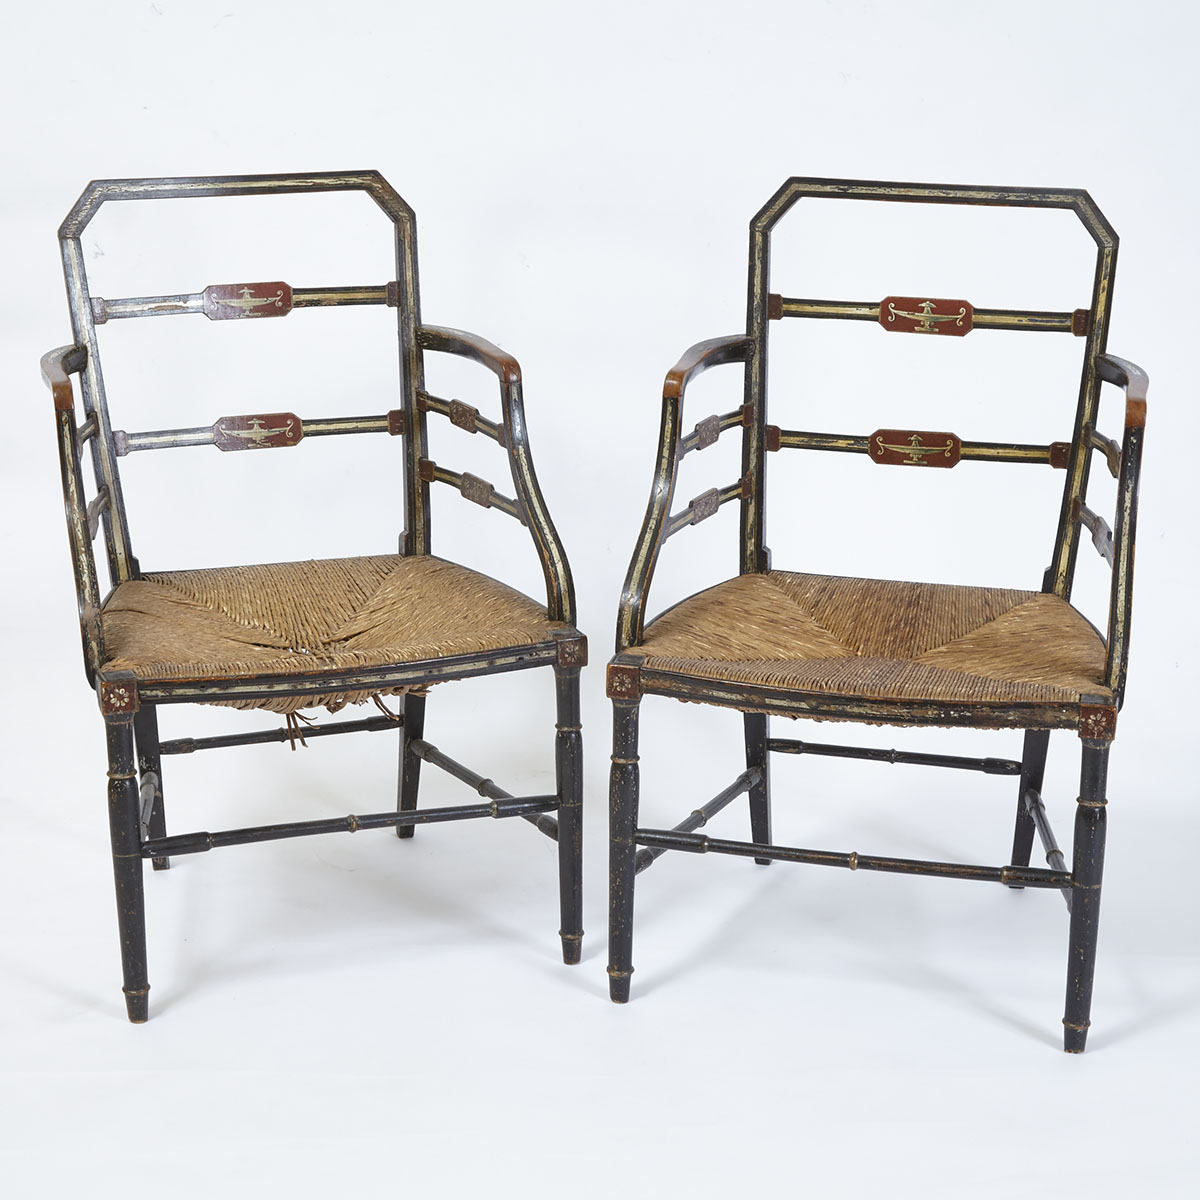 Pair of Regency Painted Open Armchairs, English, early 19th century